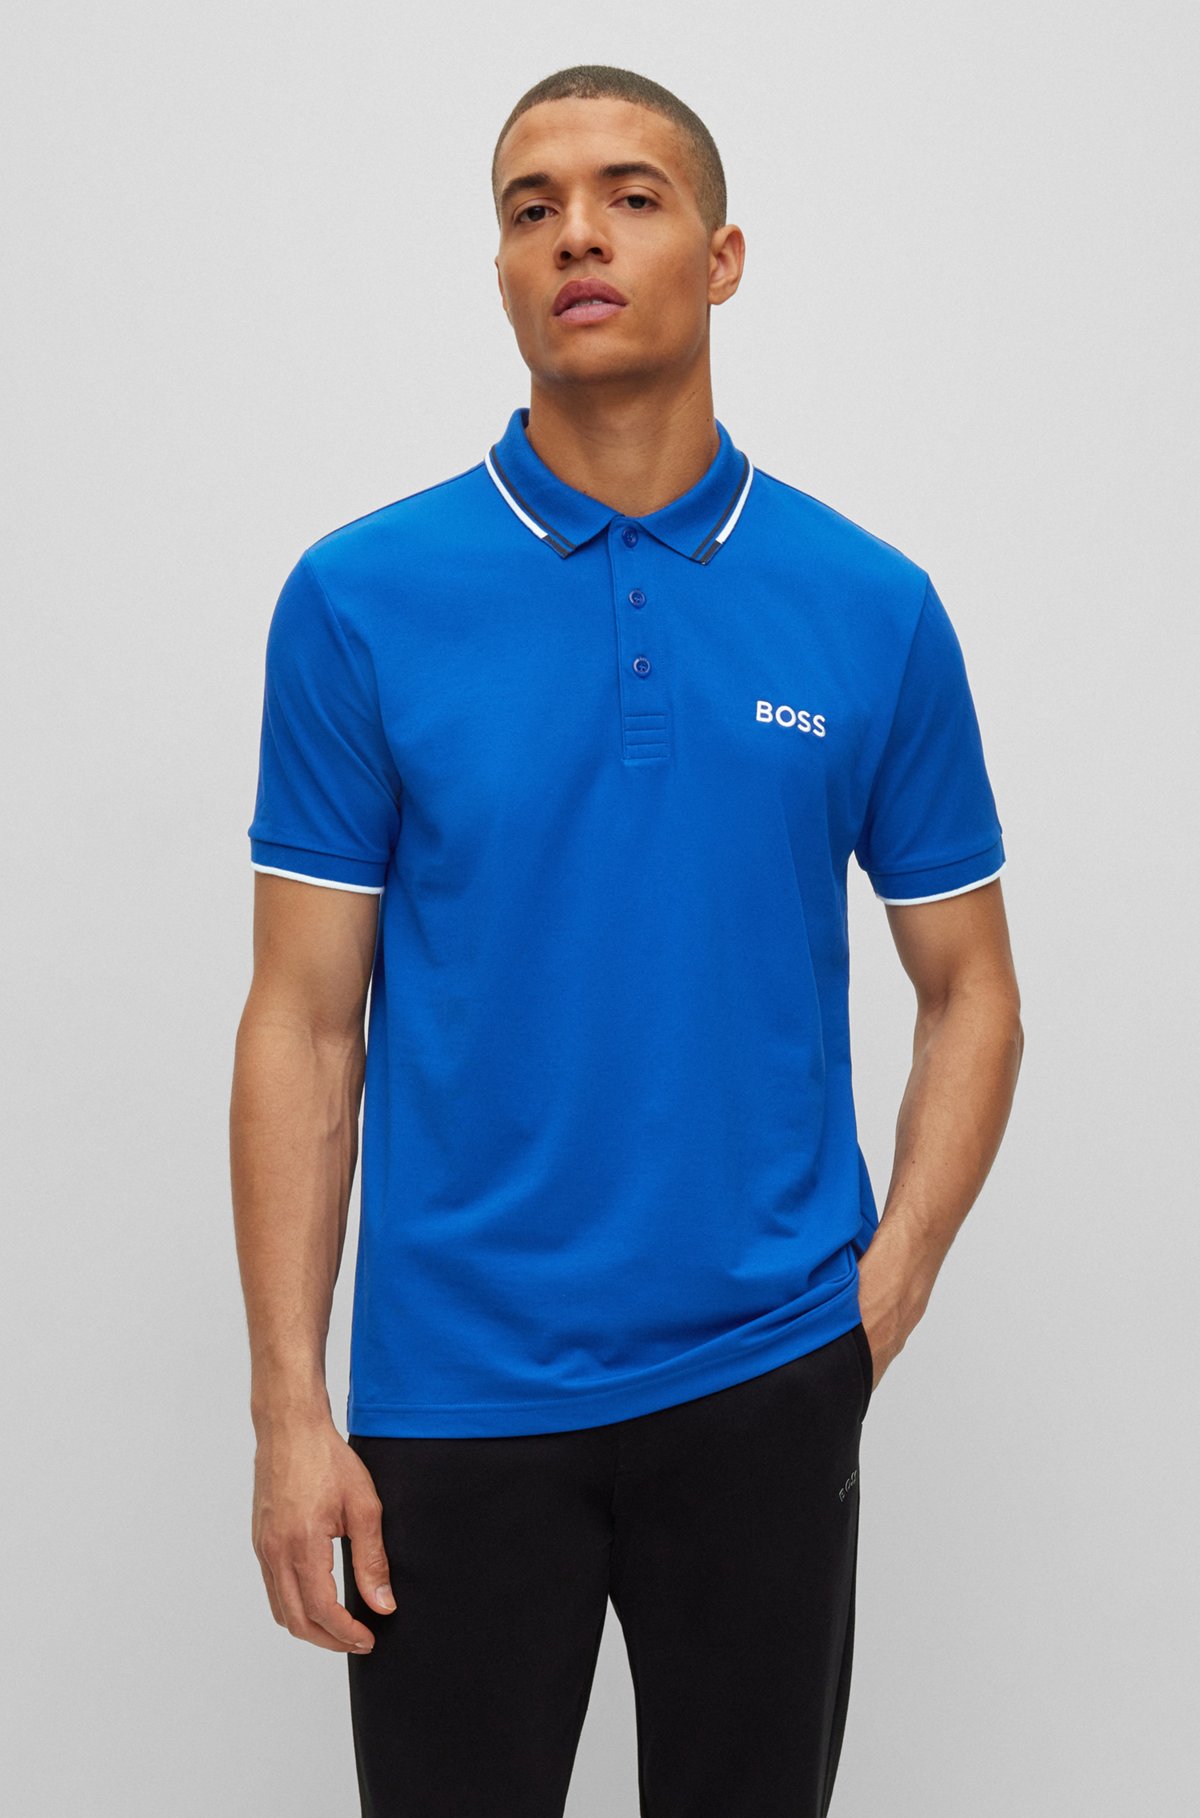 - Cotton-blend polo shirt with contrast details